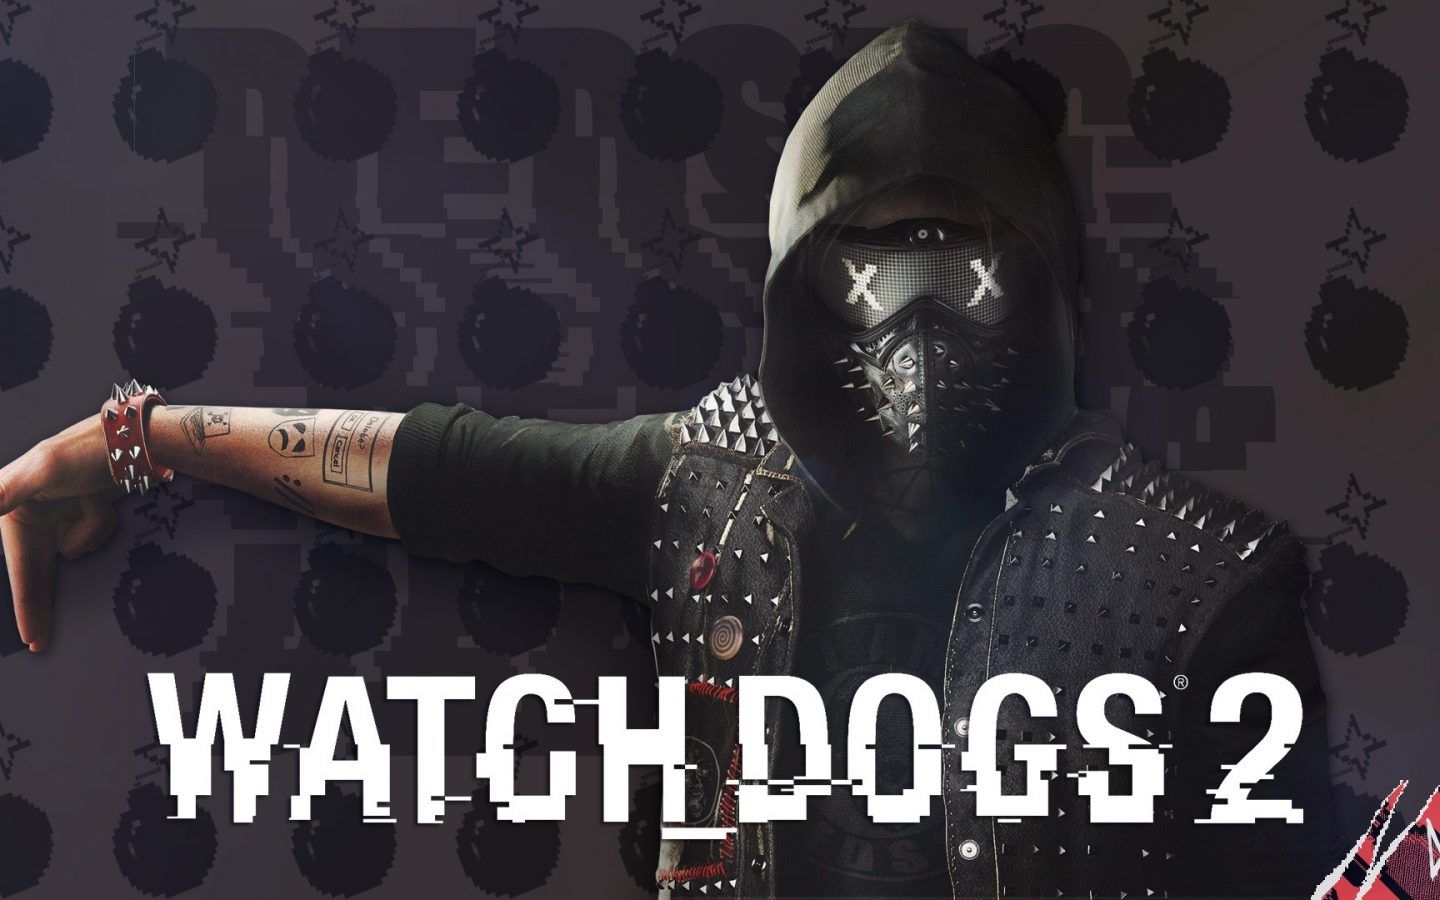 watch dogs 2 wrench wallpaper,album cover,font,poster,photo caption,music